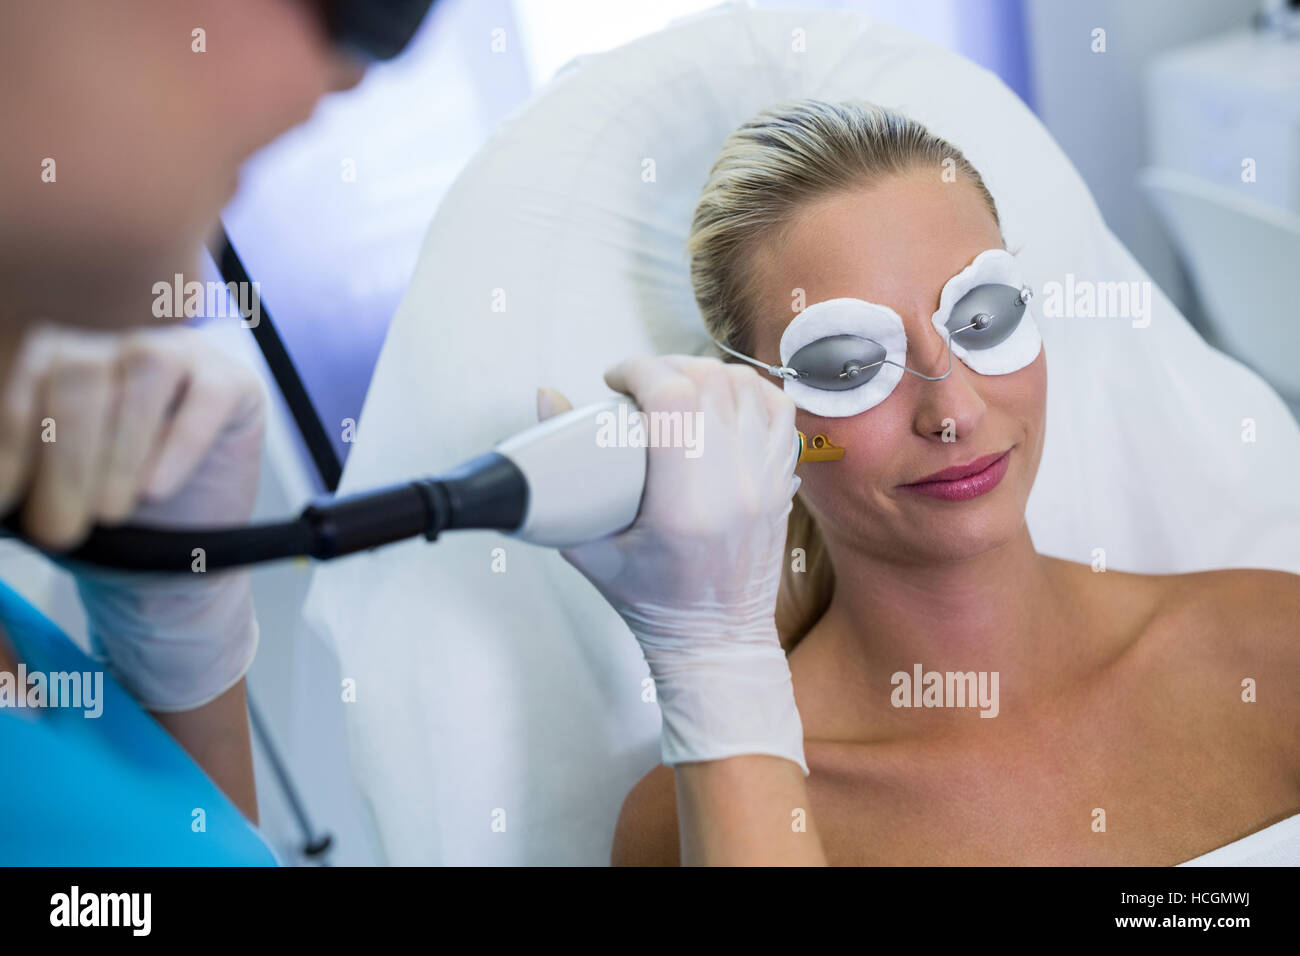 Woman receiving laser epilation treatment on her face Stock Photo